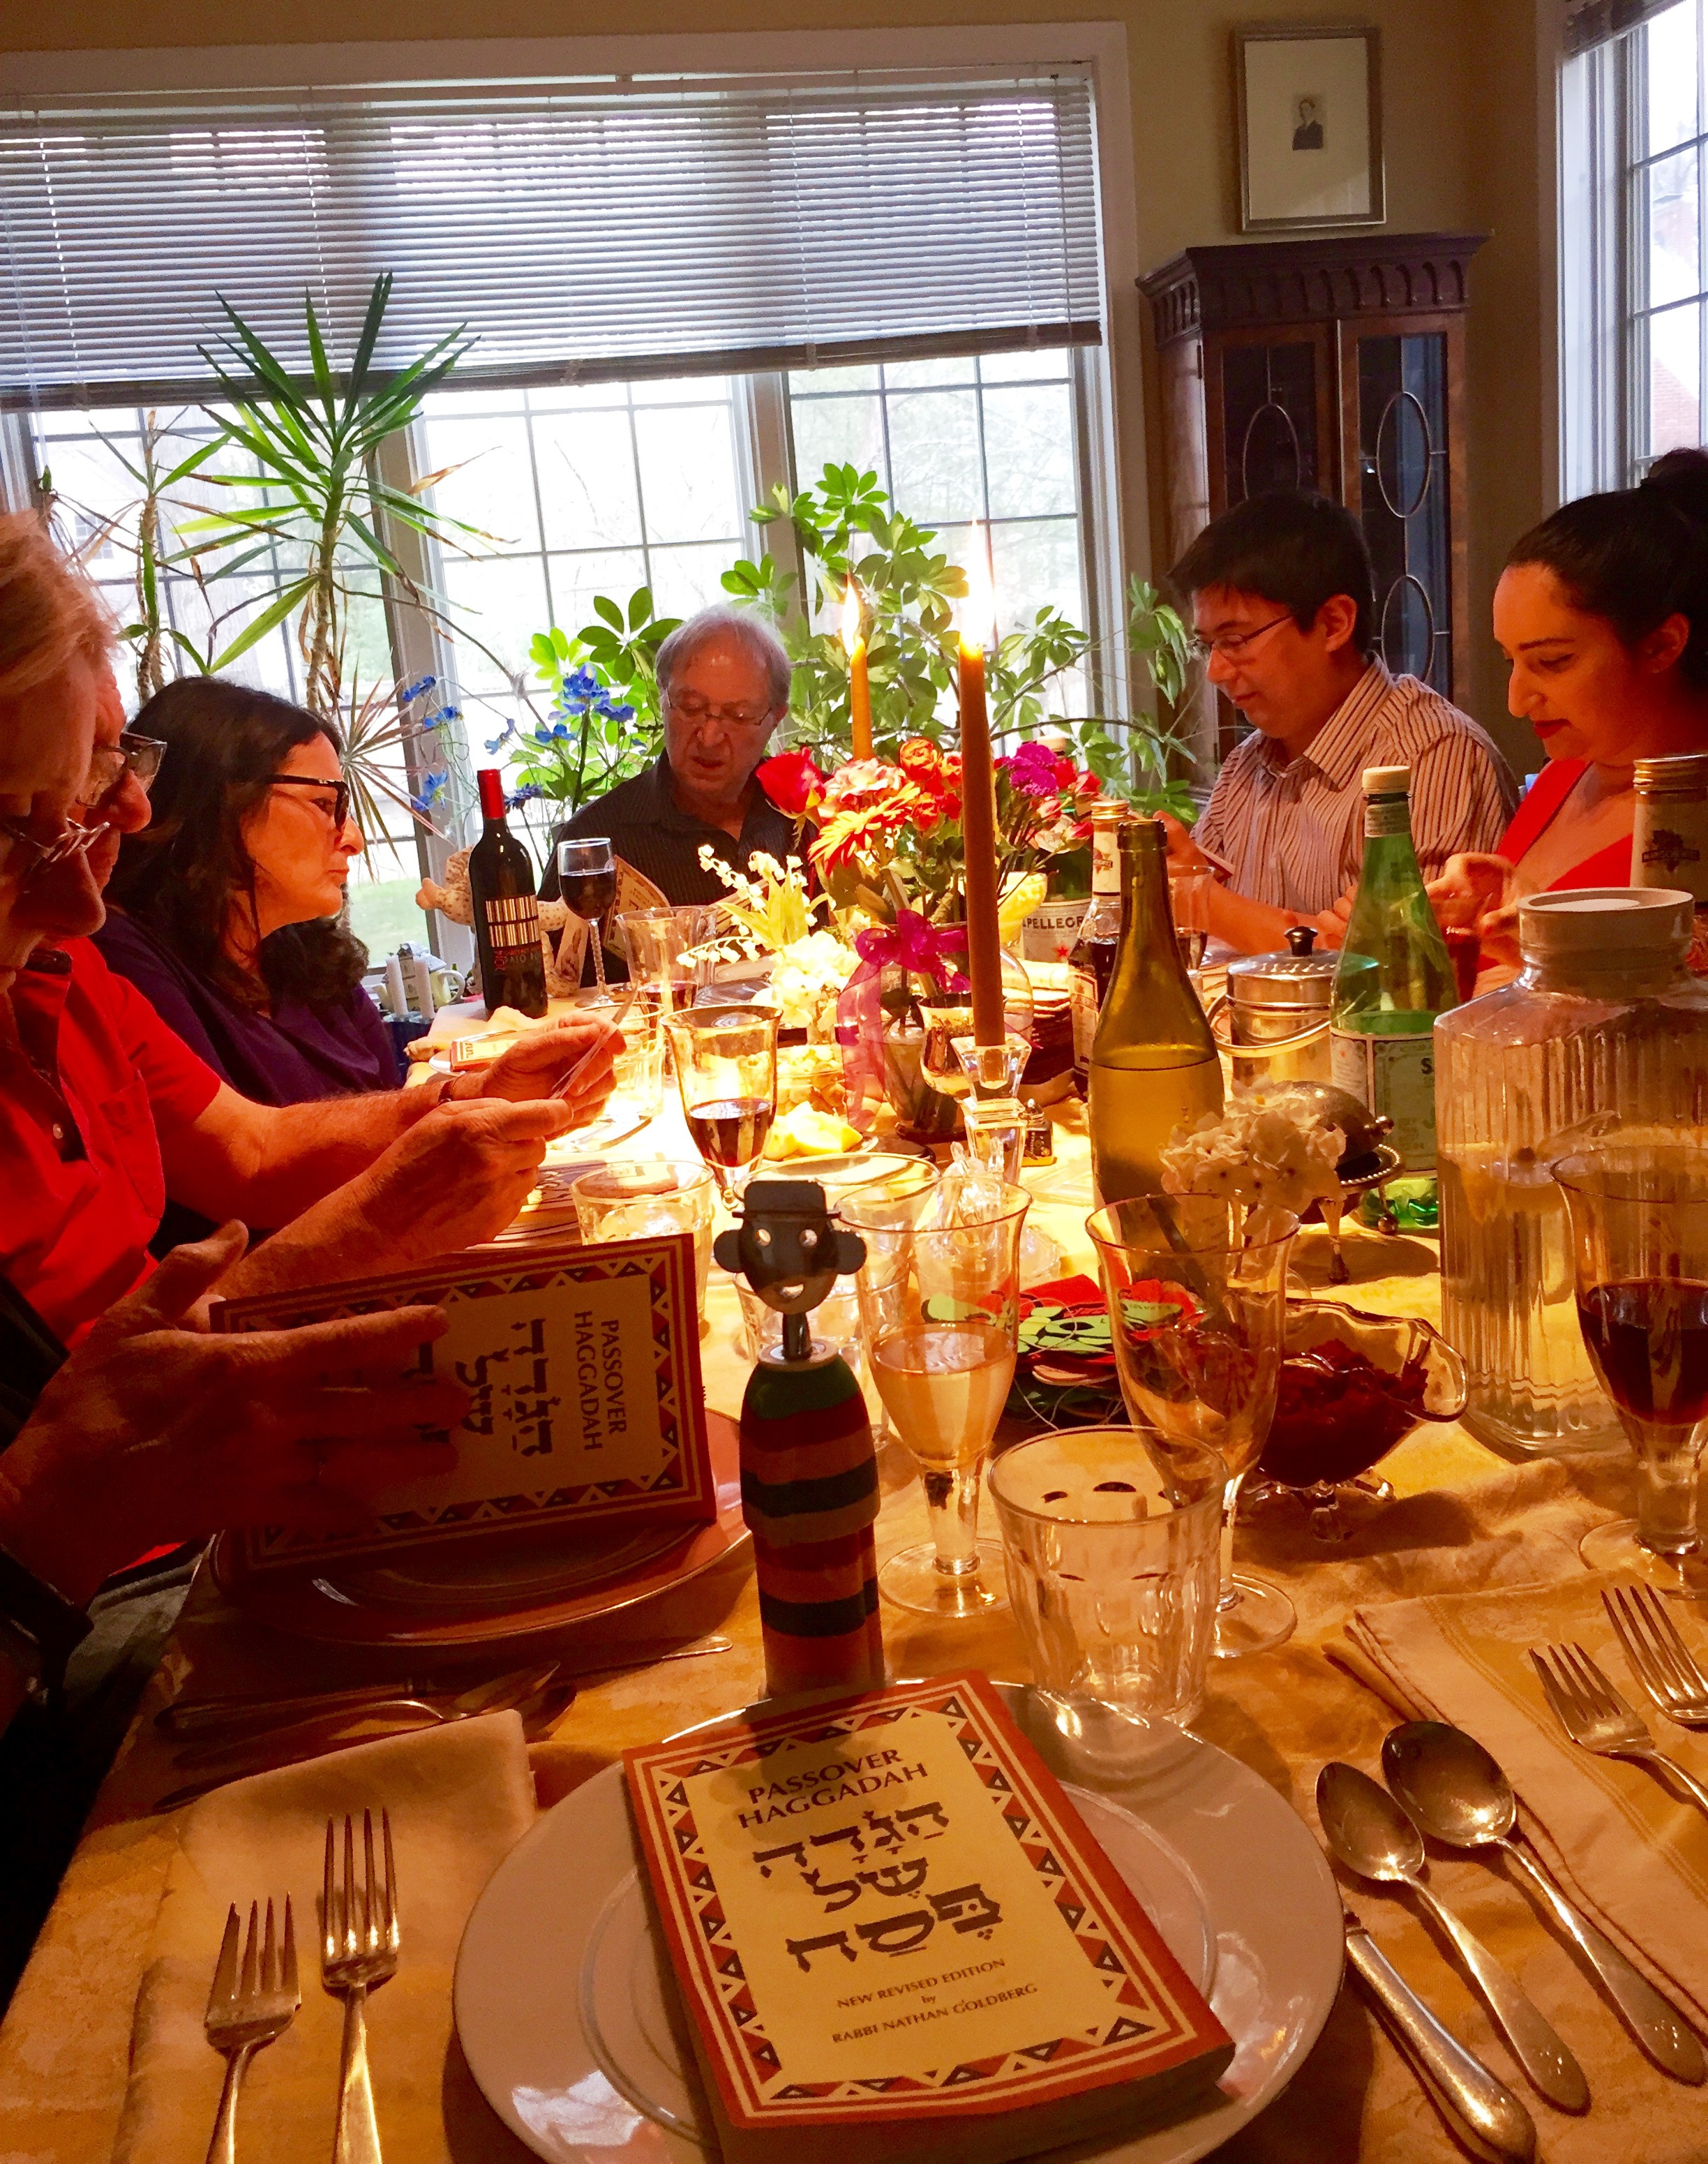 Our Passover seder 2016.jpg